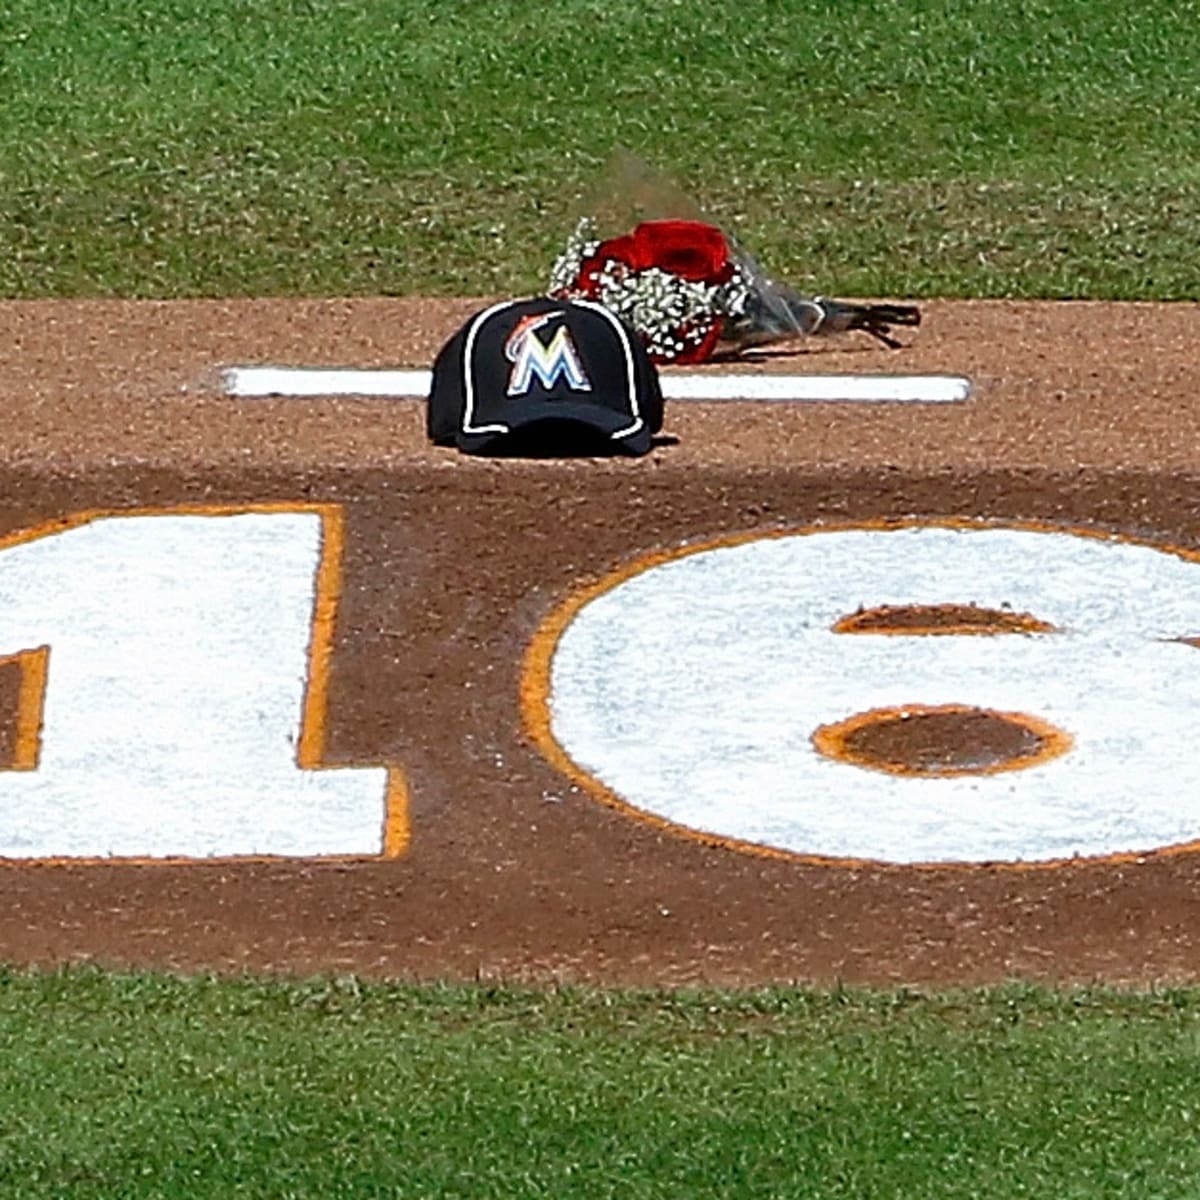 Miami Marlins will wear No. 16 jerseys on Monday to honor Jose